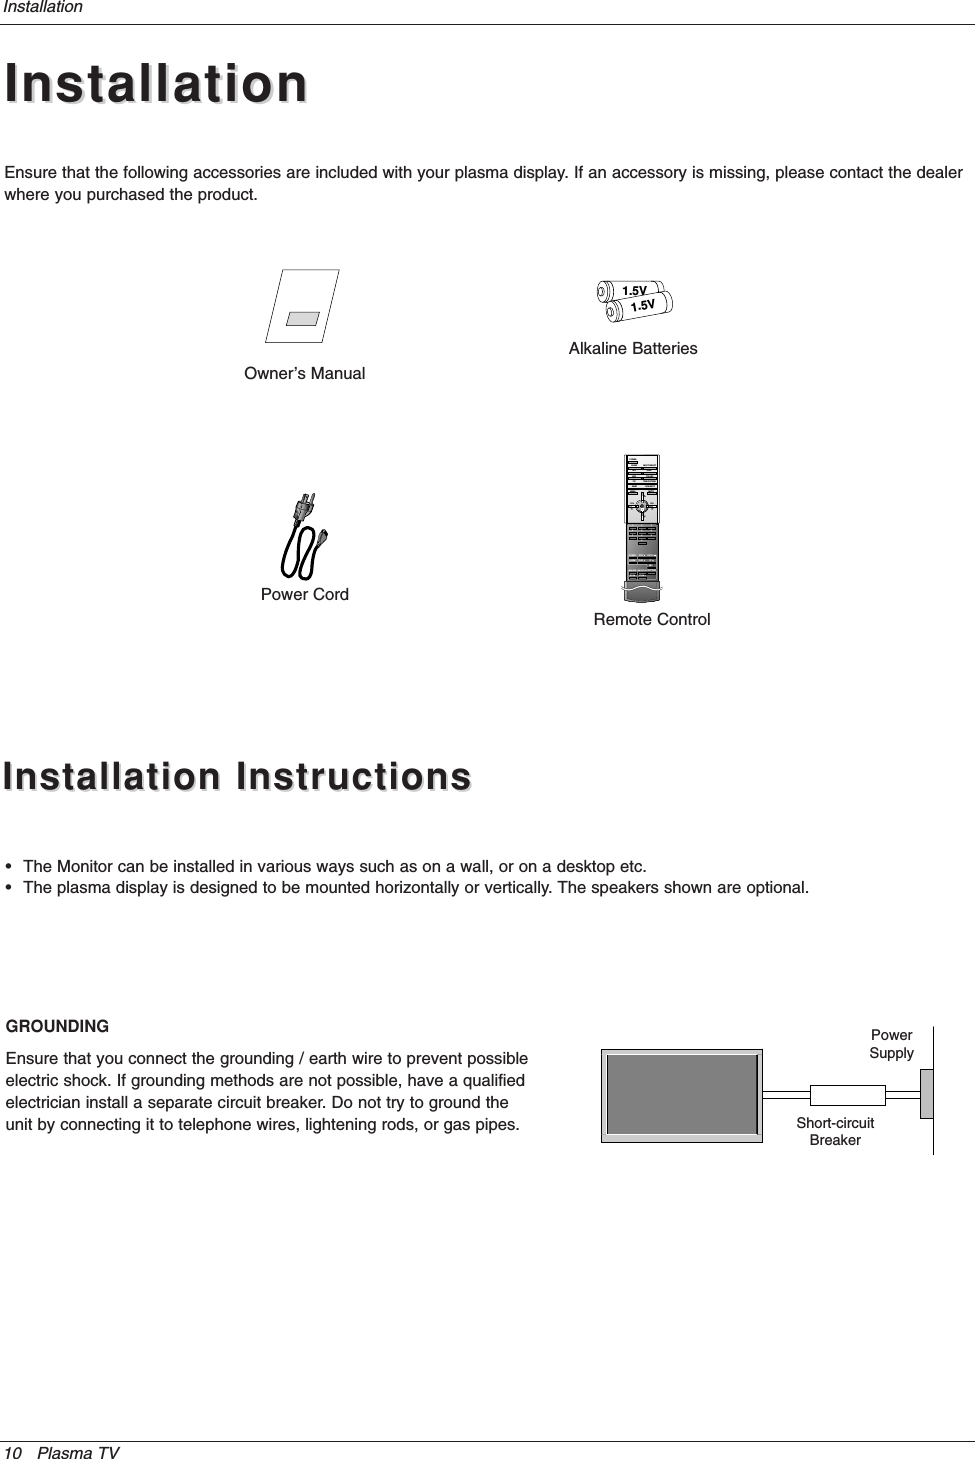 10 Plasma TVInstallationInstallationInstallationOwner’s Manual1.5V1.5VAlkaline BatteriesPower CordEnsure that the following accessories are included with your plasma display. If an accessory is missing, please contact the dealerwhere you purchased the product.Installation InstructionsInstallation Instructions•The Monitor can be installed in various ways such as on a wall, or on a desktop etc.•The plasma display is designed to be mounted horizontally or vertically. The speakers shown are optional.GROUNDINGEnsure that you connect the grounding / earth wire to prevent possibleelectric shock. If grounding methods are not possible, have a qualifiedelectrician install a separate circuit breaker. Do not try to ground theunit by connecting it to telephone wires, lightening rods, or gas pipes.PowerSupplyShort-circuitBreaker1234567809POWERSLEEP INPUT SELECTAPC DASPARC PIP ARCPIPTWIN PICTURESWAPMENU MUTEOKVOLPOWER STOPPLAY FFRECREWP/STILLWIN.SIZEWIN.POSITIONZOOM +ZOOM -SPLIT ZOOMVOLSUB INPUTRemote Control